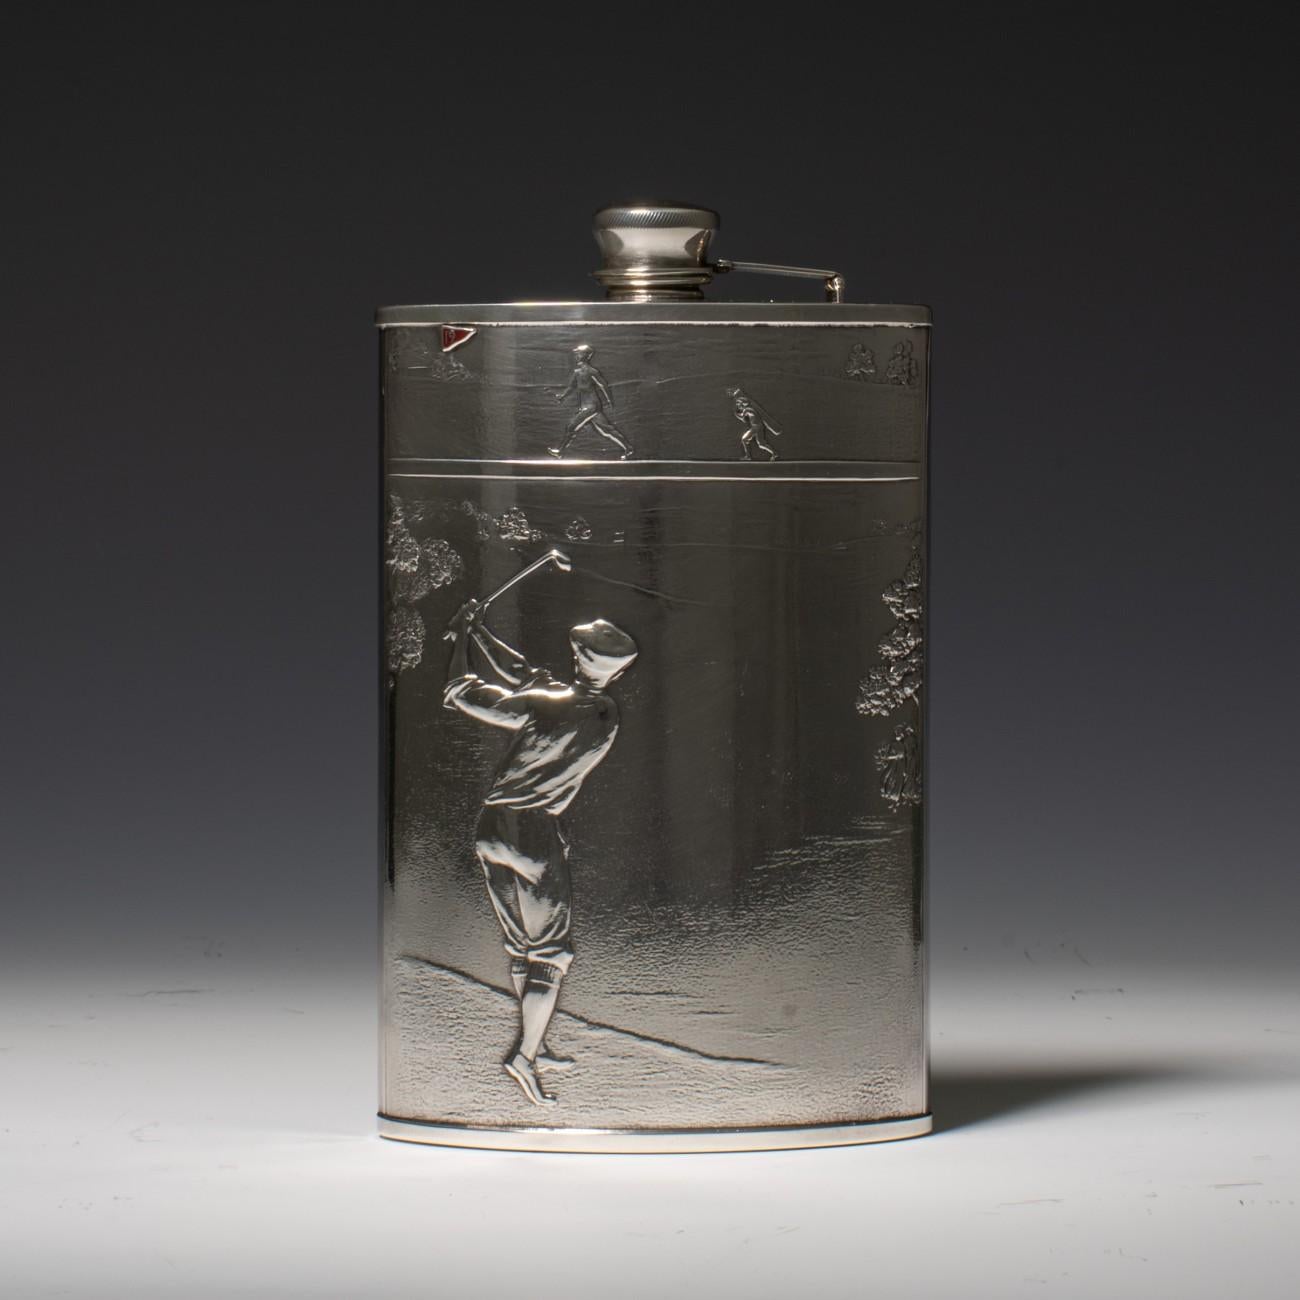 An American Golf hip flask with maker's mark for The Evans Nickel Silver Co. and stamped Nickel Silver, circa 1930. The body of the flask is embossed with a large central scene of a male golfer in full swing, with a golfer and boy caddy walking